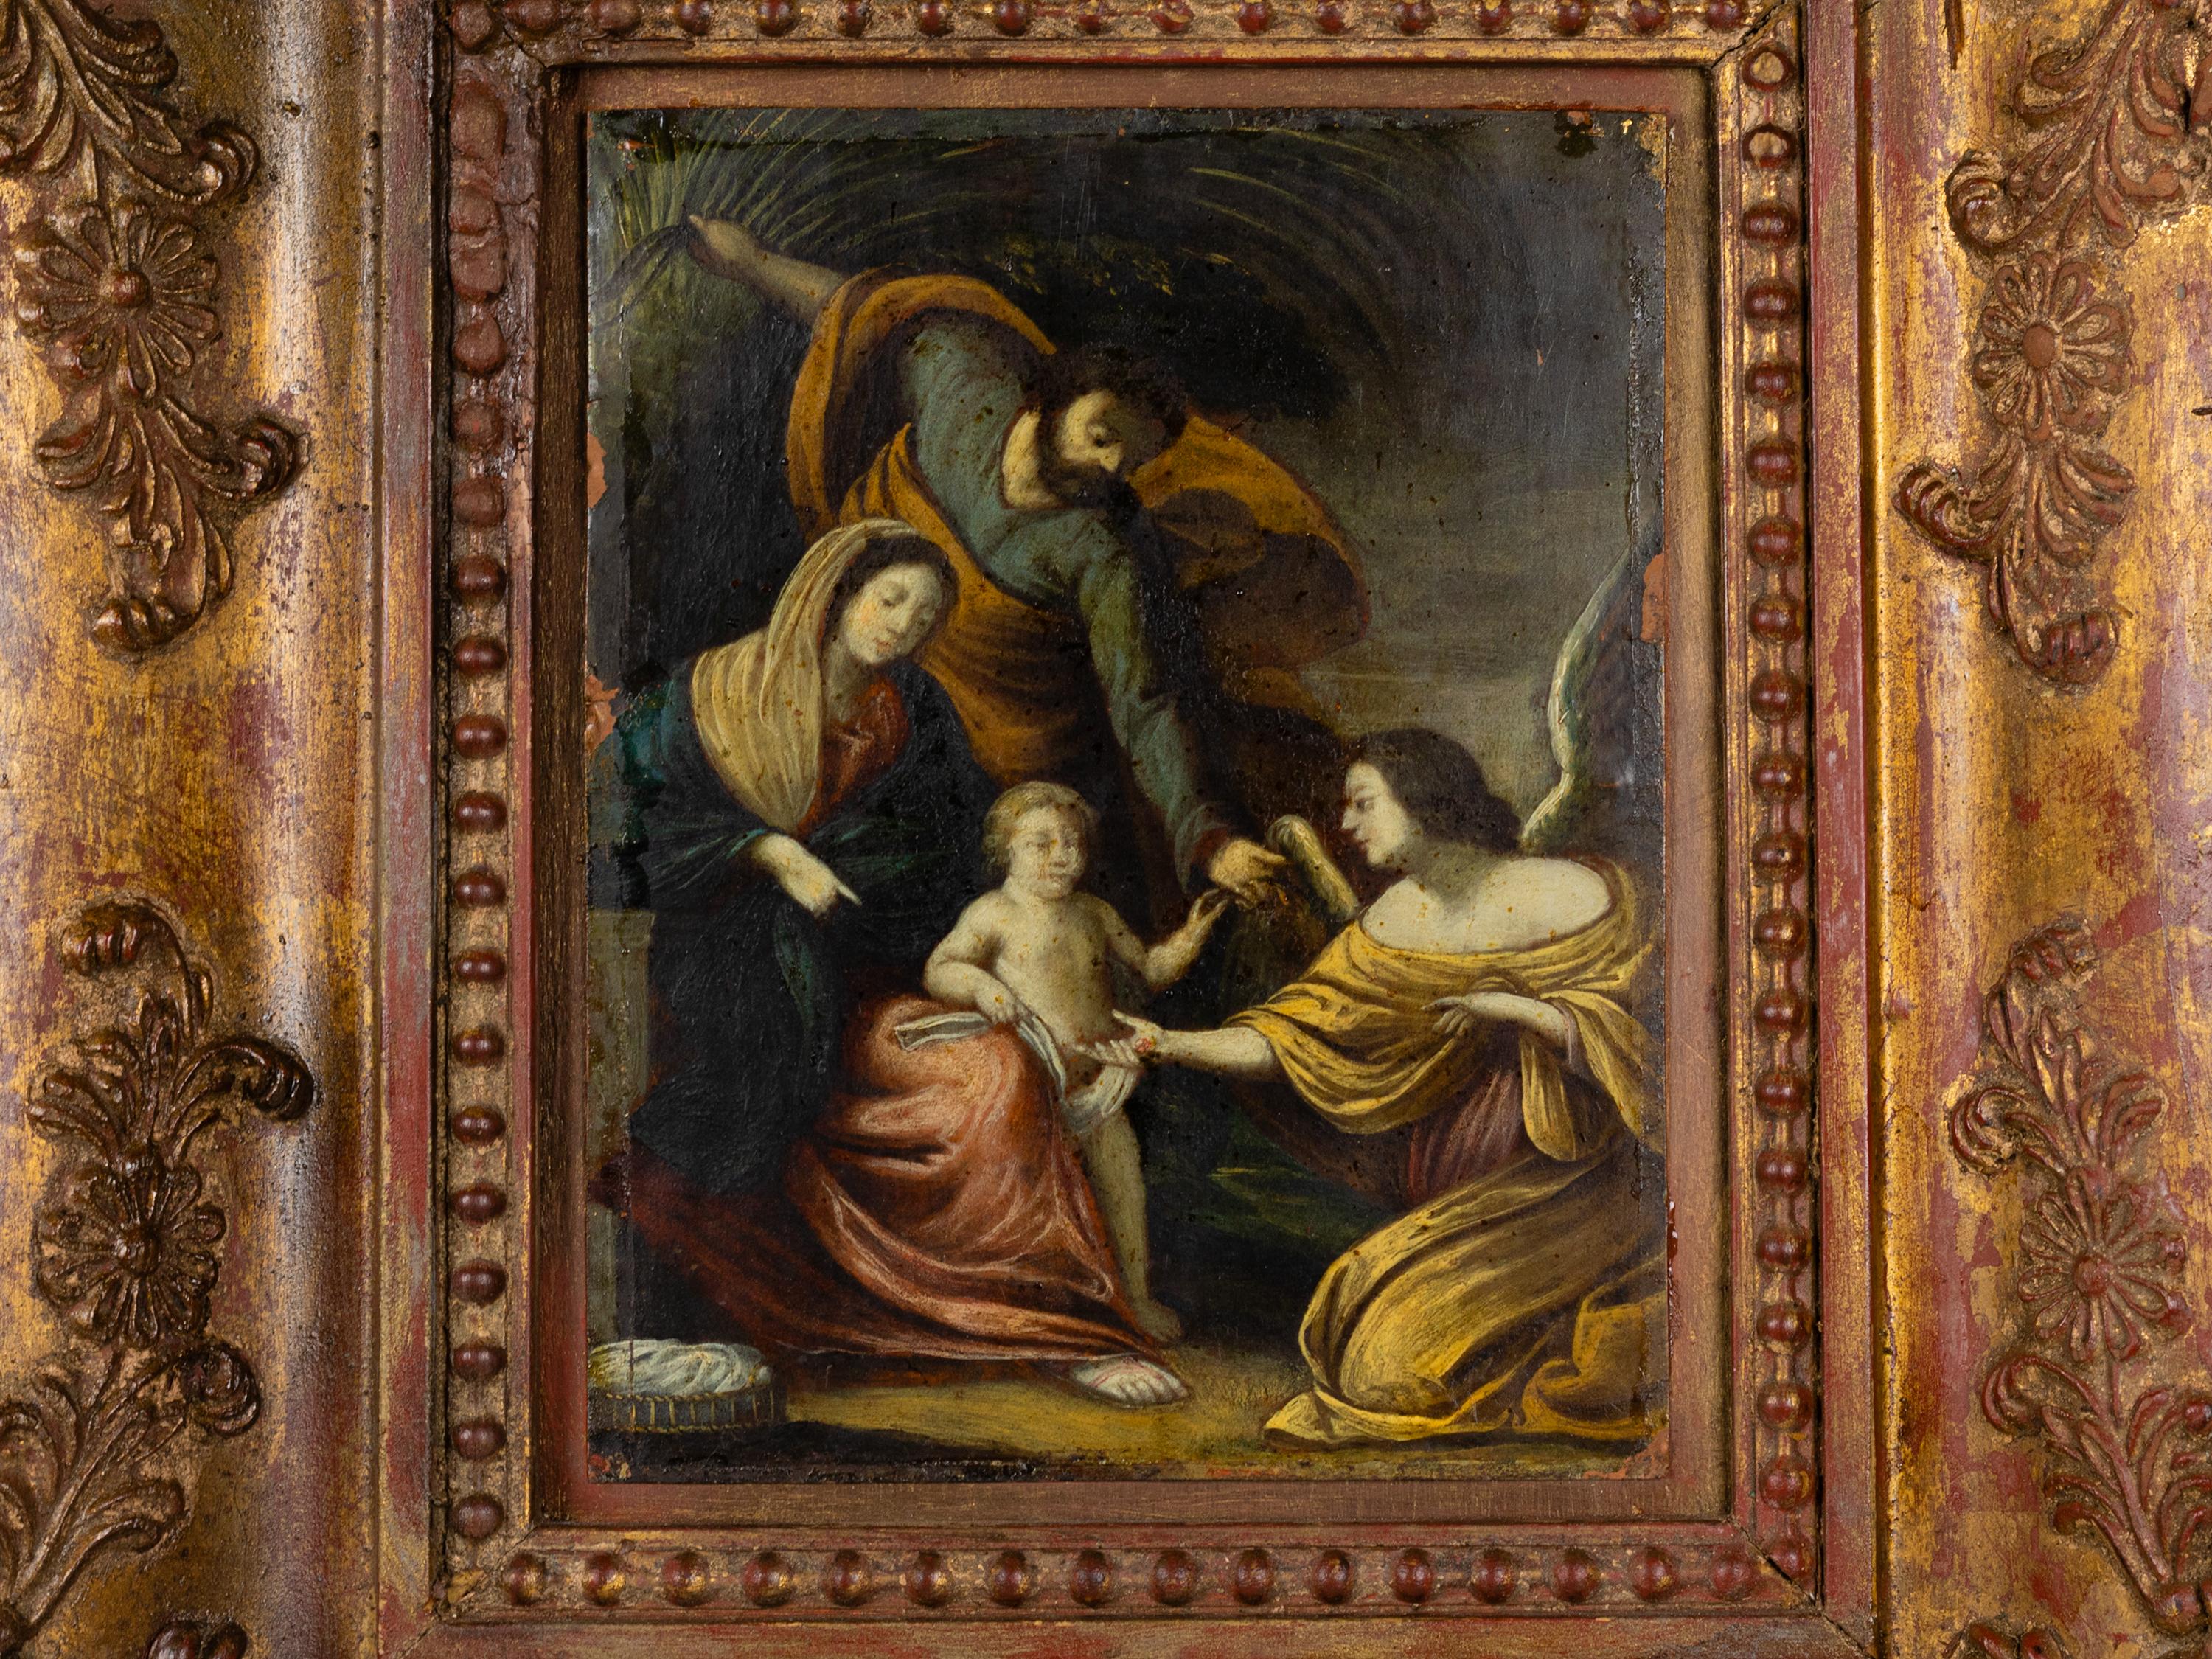 An 18th Century painting that depicts the Holy Family, Child Jesus, the Virgin Mary and the elderly Saint Joseph, with the Angel.
Oil on Copper.  

Frame:
Width: 18,11 in (46 cm) 
Depth: 15,74 in (40 cm) 

Canvas:
Width: 8,85 in (22,5 cm) 
Depth: